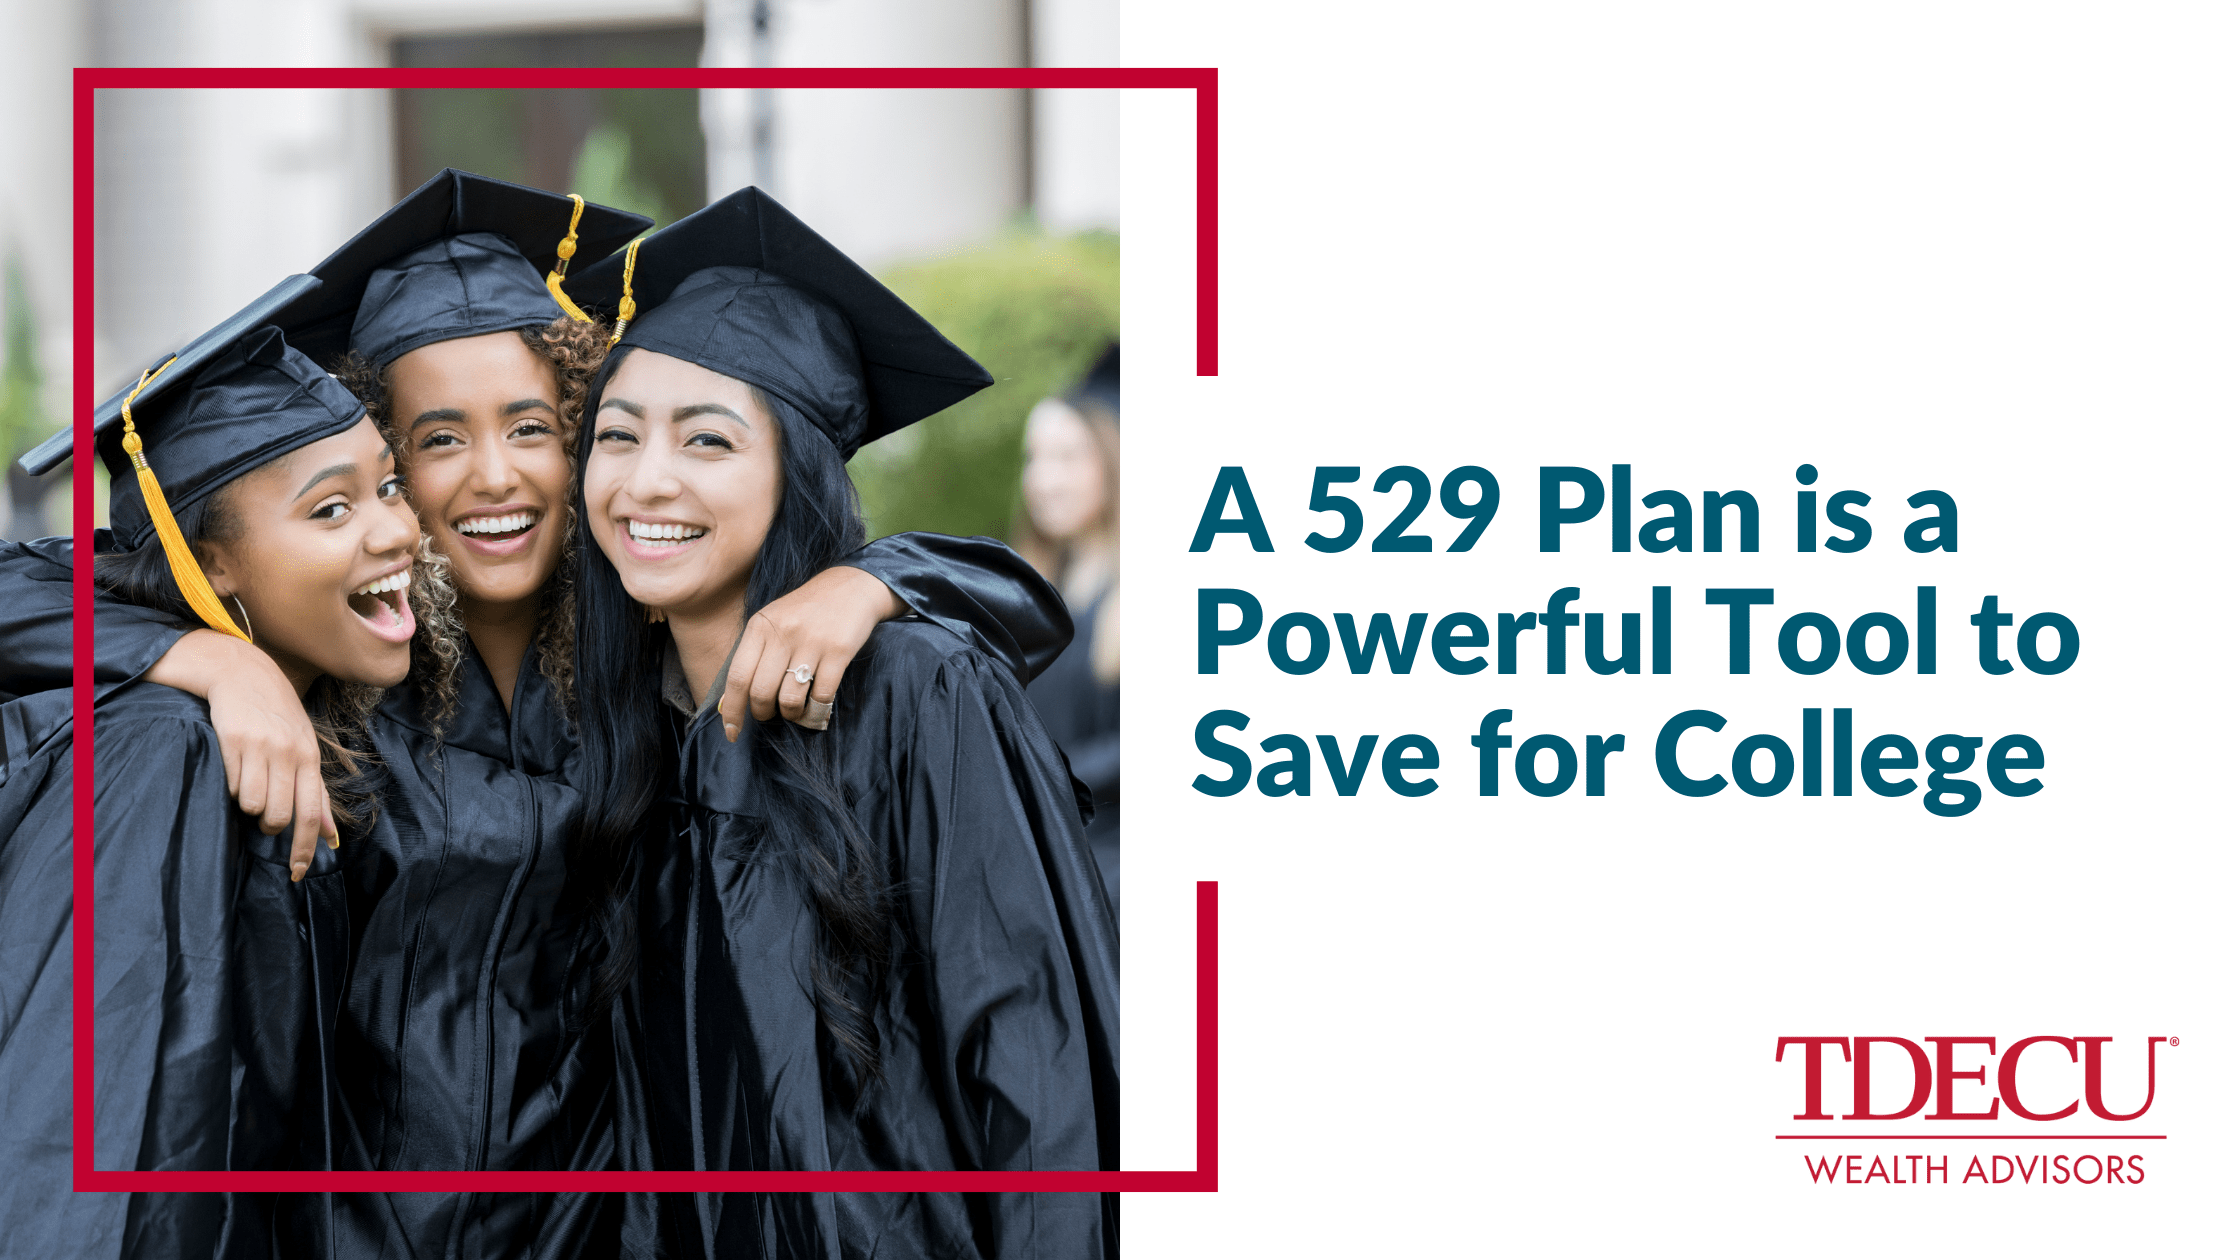 A 529 Plan is a Powerful Tool to Save for College